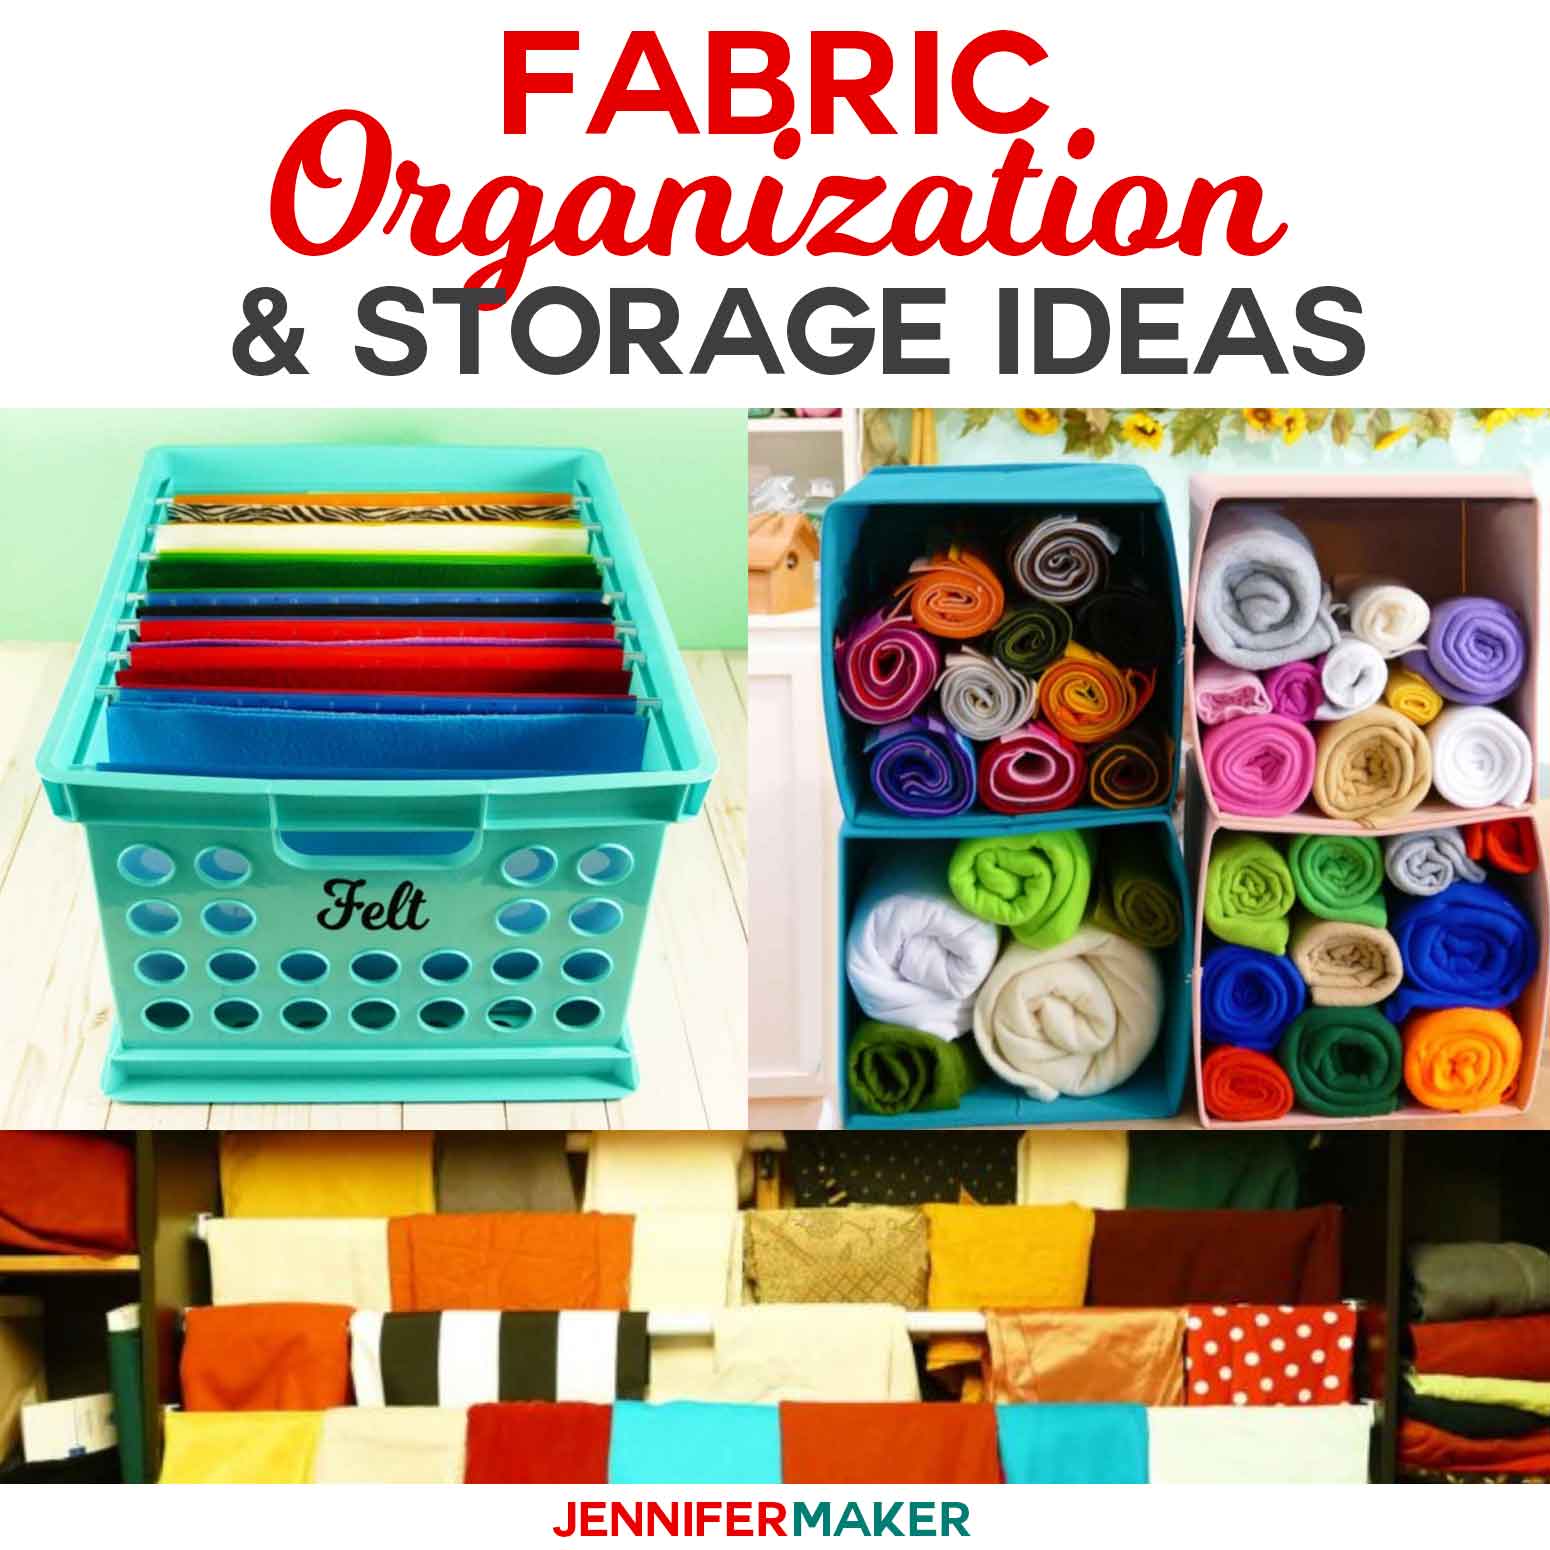 Organize and store your fabric with these great organization ideas and storage solutions! #craftroom #storage #organization #fabric #sewingroom